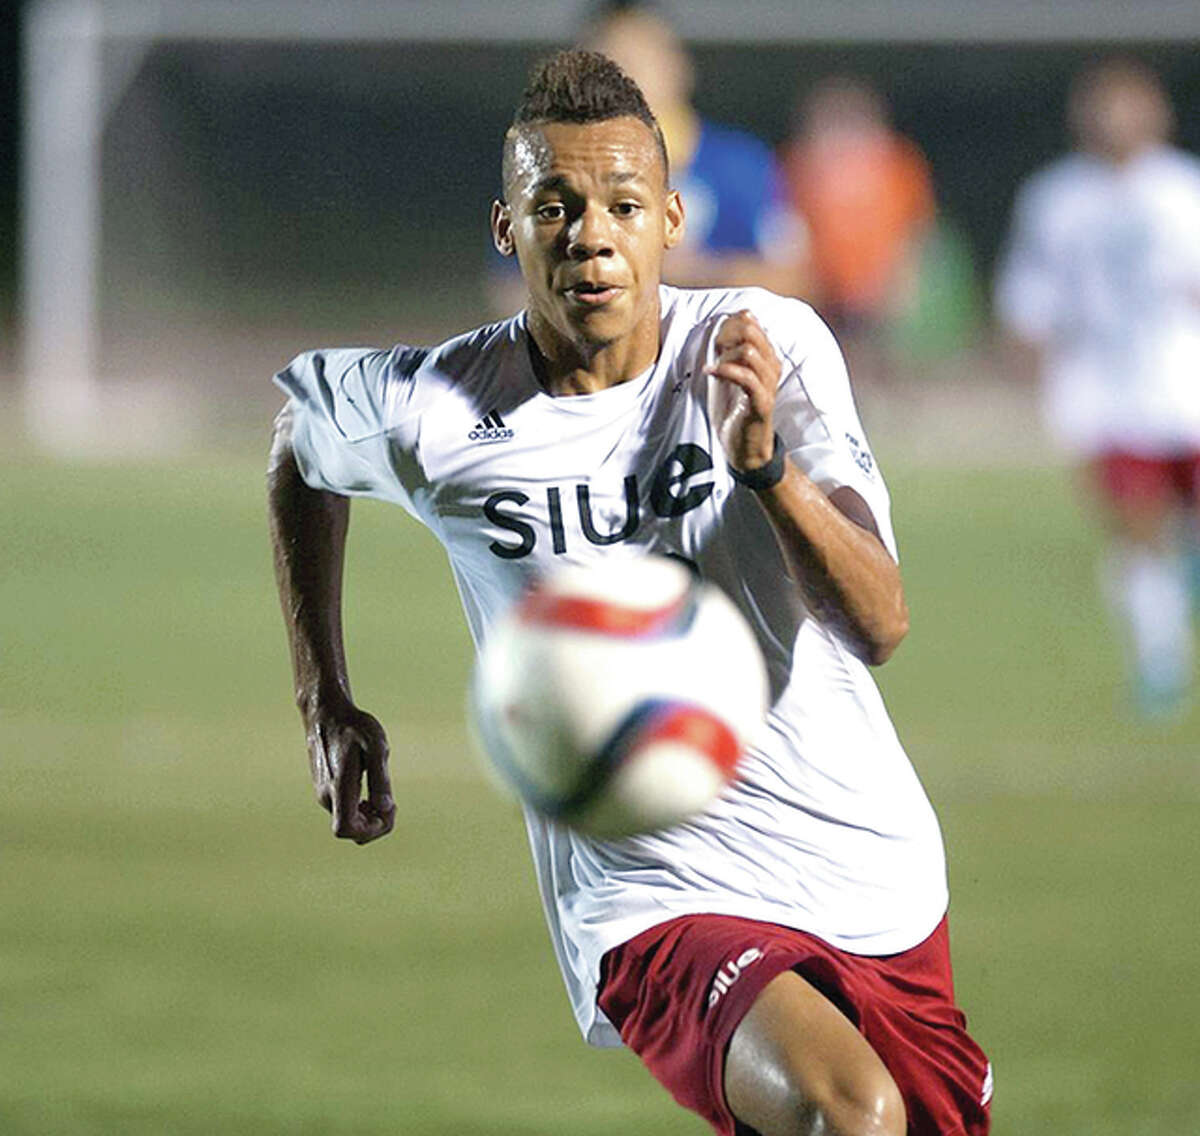 SIUE junior Devyn Jambga has been named the Missouri Valley Conference men’s soccer Offensive Player of the Week. The native of Harrare, Zimbabwe, led the Cougars to a pair of wins, scoring two goals and adding an assist.